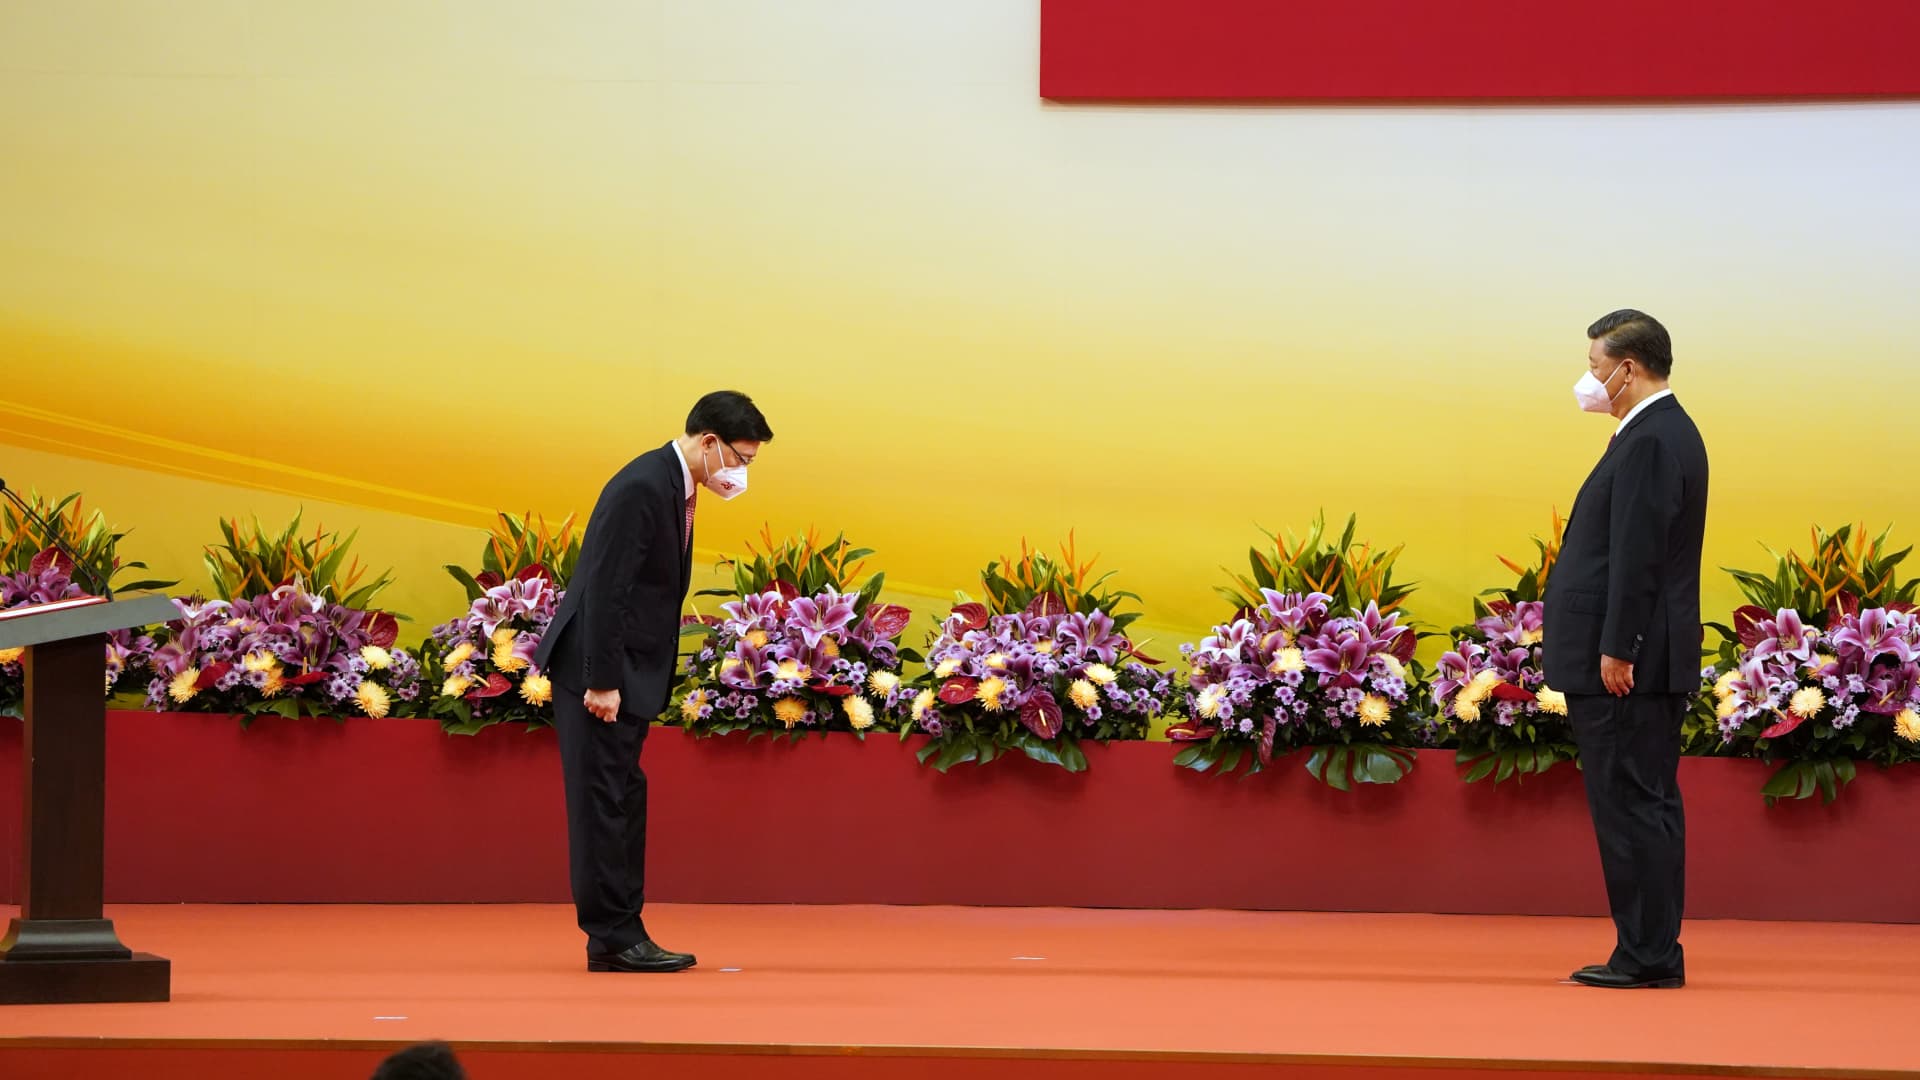 Hong Kong's new leader has work cut out for him. Here are some of his priorities